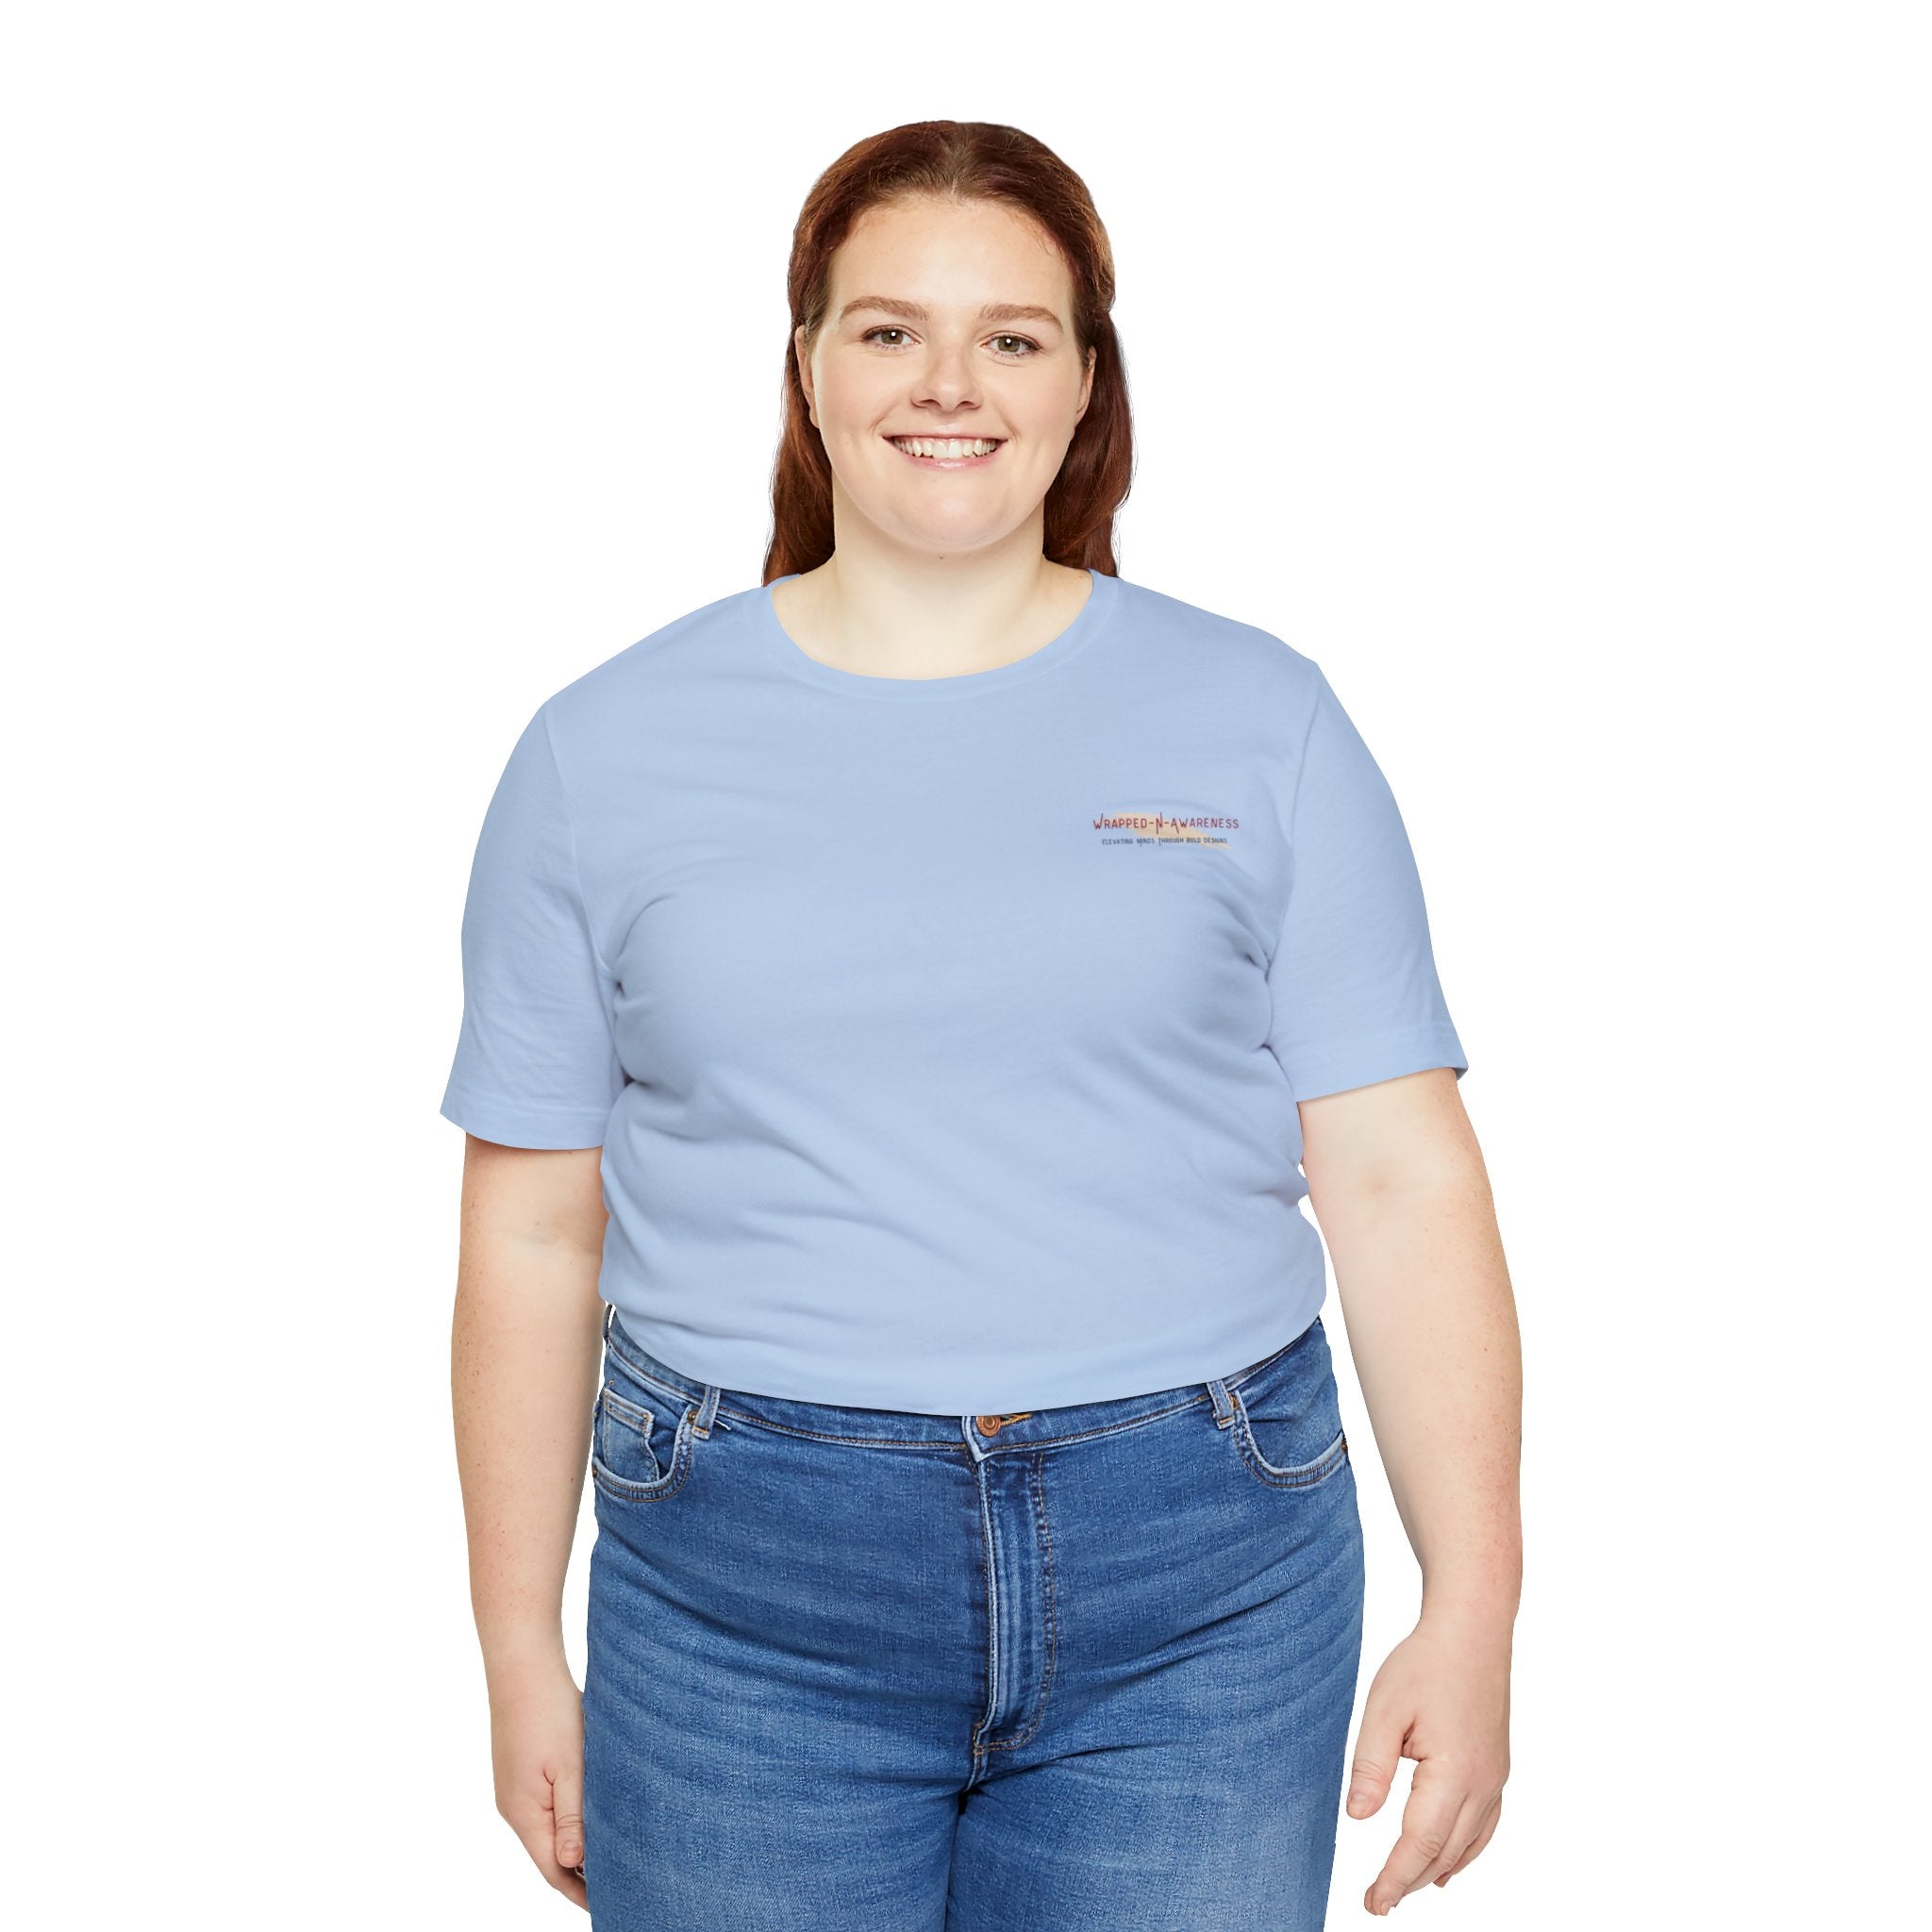 Hope Conquers Fear Jersey Tee - Bella+Canvas 3001 Heather Ice Blue Airlume Cotton Bella+Canvas 3001 Crew Neckline Jersey Short Sleeve Lightweight Fabric Mental Health Support Retail Fit Tear-away Label Tee Unisex Tee T-Shirt 1298478664177386110_2048 Printify